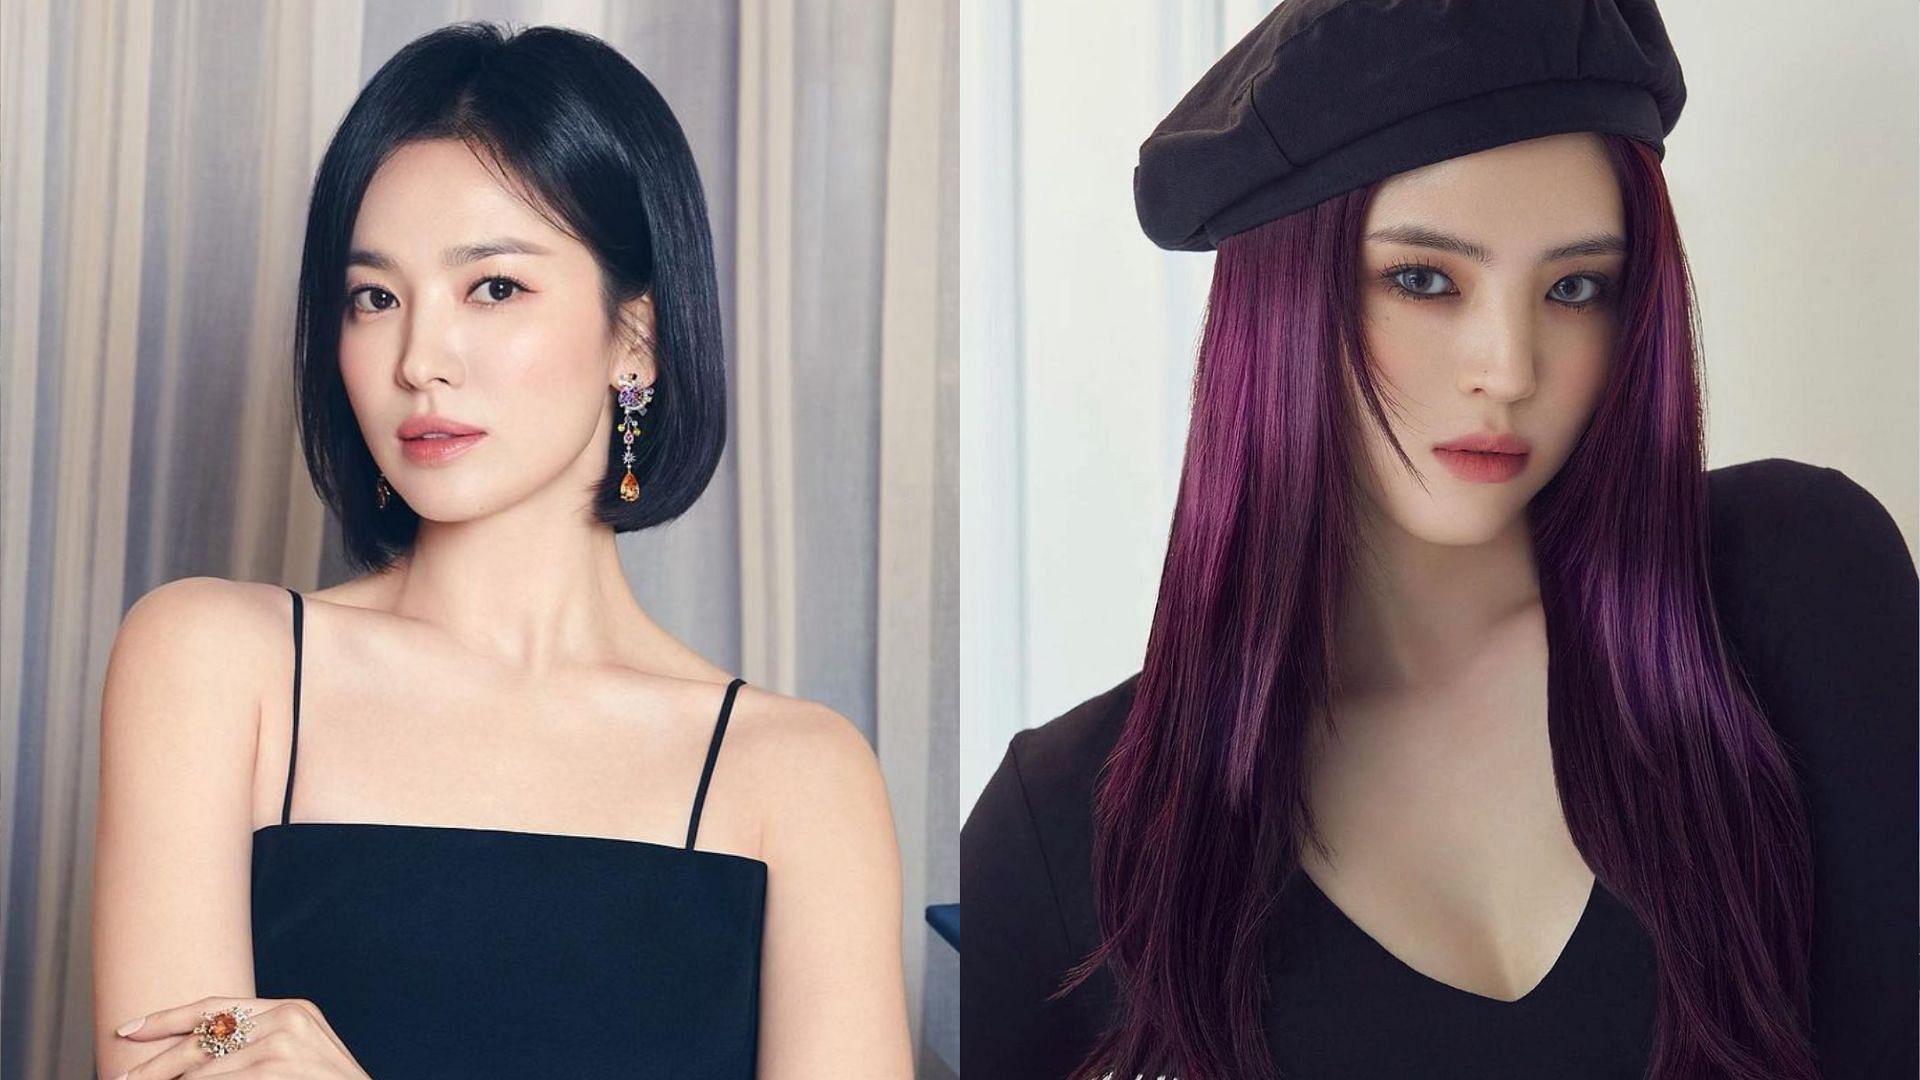 Song Hye-kyo and Han So-hee might join forces for a new mystery thriller drama (Images via Instagram/kyo1122 and xeesoxee)